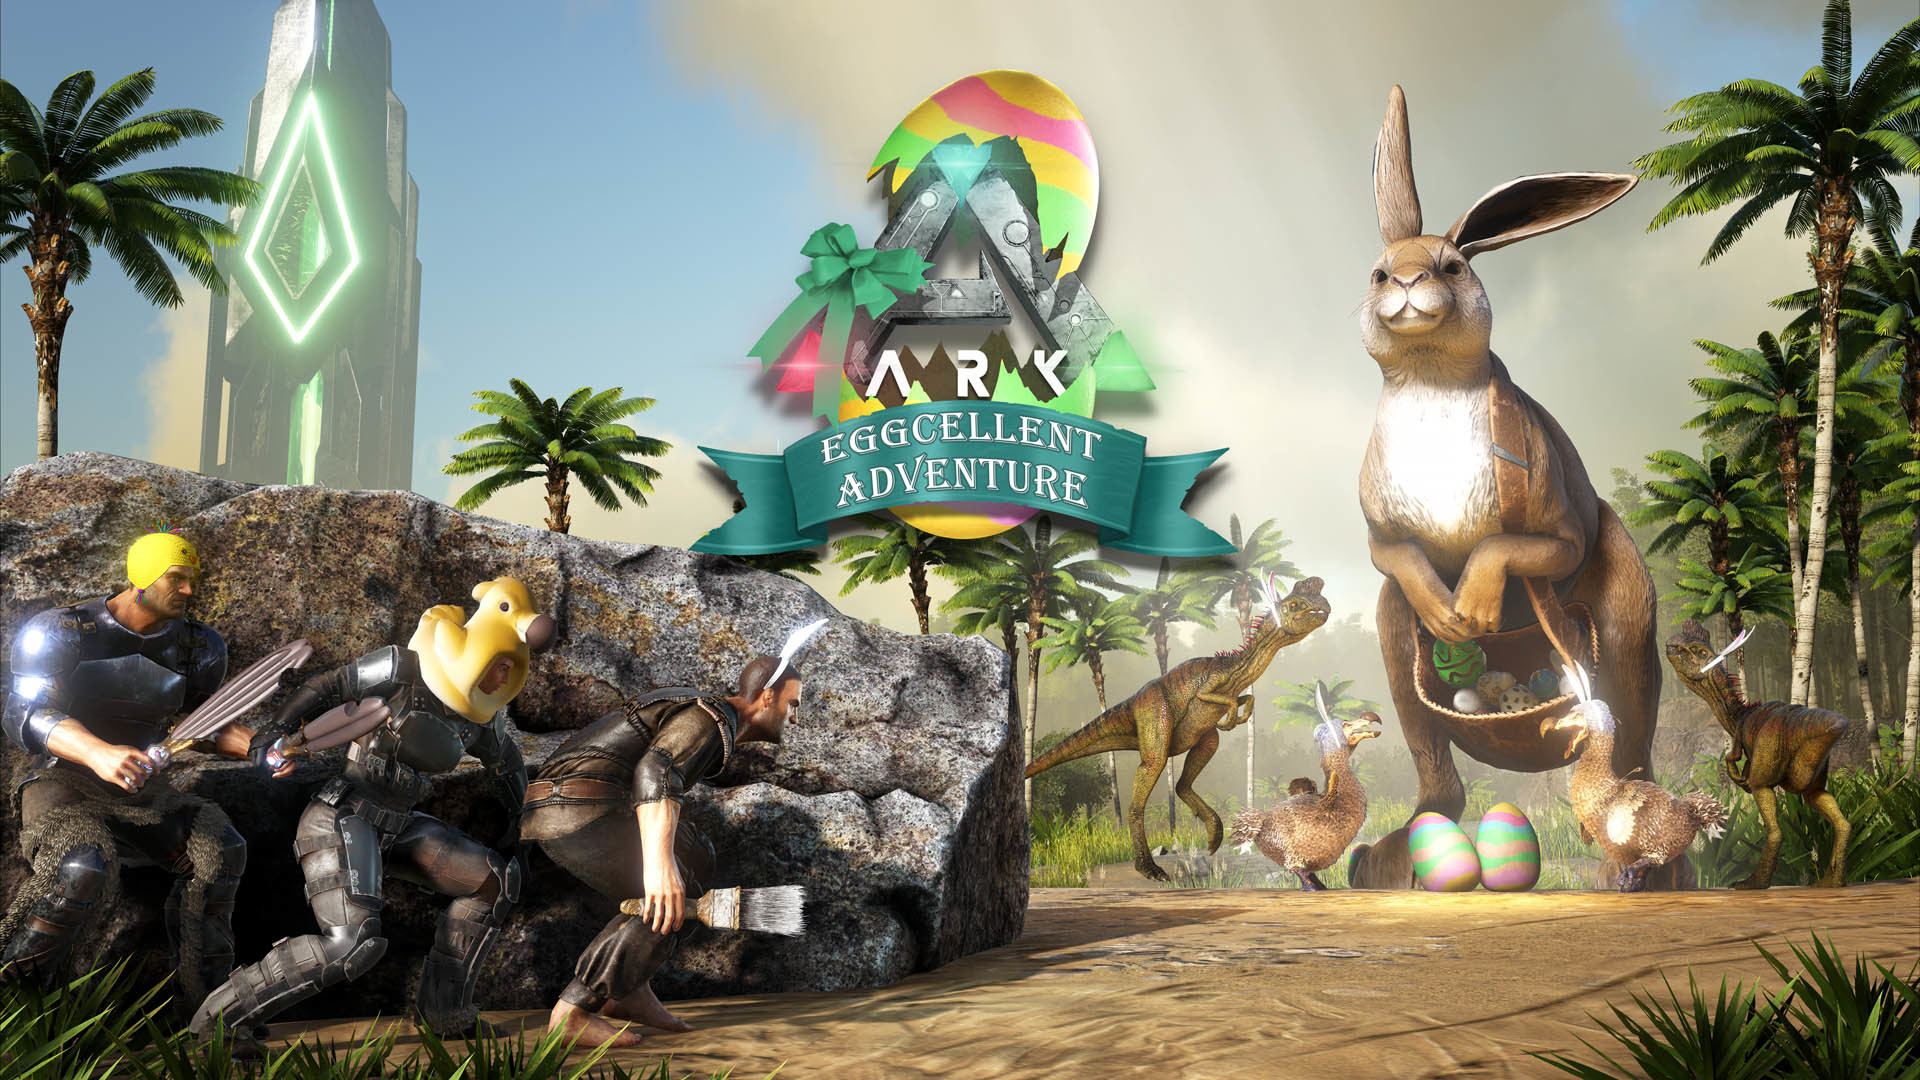 Steam Community :: Guide :: Paleo ARK Expansion: Official Guide